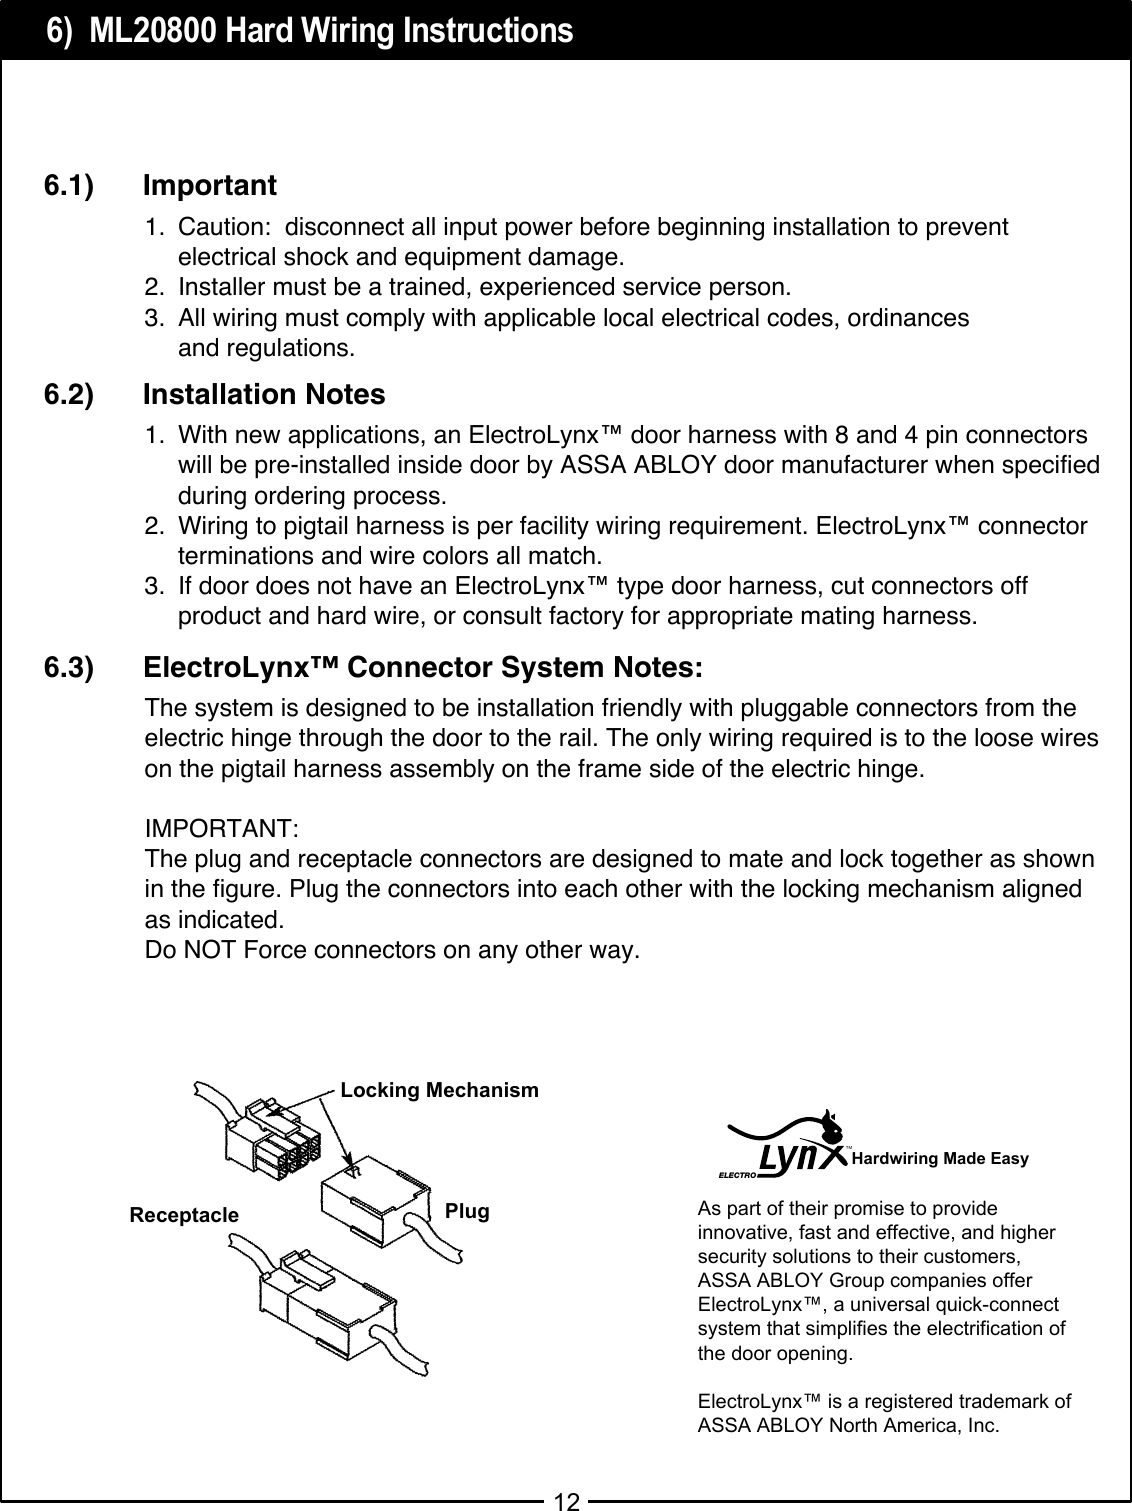 6)  ML20800 Hard Wiring Instructions121. Caution:  disconnect all input power before beginning installation to prevent electrical shock and equipment damage.2. Installer must be a trained, experienced service person.3. All wiring must comply with applicable local electrical codes, ordinances and regulations.6.1)      Important1. With new applications, an ElectroLynx™ door harness with 8 and 4 pin connectors will be pre-installed inside door by ASSA ABLOY door manufacturer when specified during ordering process.2. Wiring to pigtail harness is per facility wiring requirement. ElectroLynx™ connector terminations and wire colors all match.3. If door does not have an ElectroLynx™ type door harness, cut connectors off product and hard wire, or consult factory for appropriate mating harness. 6.2)      Installation NotesThe system is designed to be installation friendly with pluggable connectors from theelectric hinge through the door to the rail. The only wiring required is to the loose wireson the pigtail harness assembly on the frame side of the electric hinge.IMPORTANT:The plug and receptacle connectors are designed to mate and lock together as shownin the figure. Plug the connectors into each other with the locking mechanism alignedas indicated.Do NOT Force connectors on any other way.6.3)      ElectroLynx™ Connector System Notes:As part of their promise to provideinnovative, fast and effective, and highersecurity solutions to their customers,ASSA ABLOY Group companies offerElectroLynx™, a universal quick-connectsystem that simplifies the electrification of the door opening.ElectroLynx™ is a registered trademark of ASSA ABLOY North America, Inc. ReceptacleLocking MechanismPlugHardwiring Made EasyELECTROTM